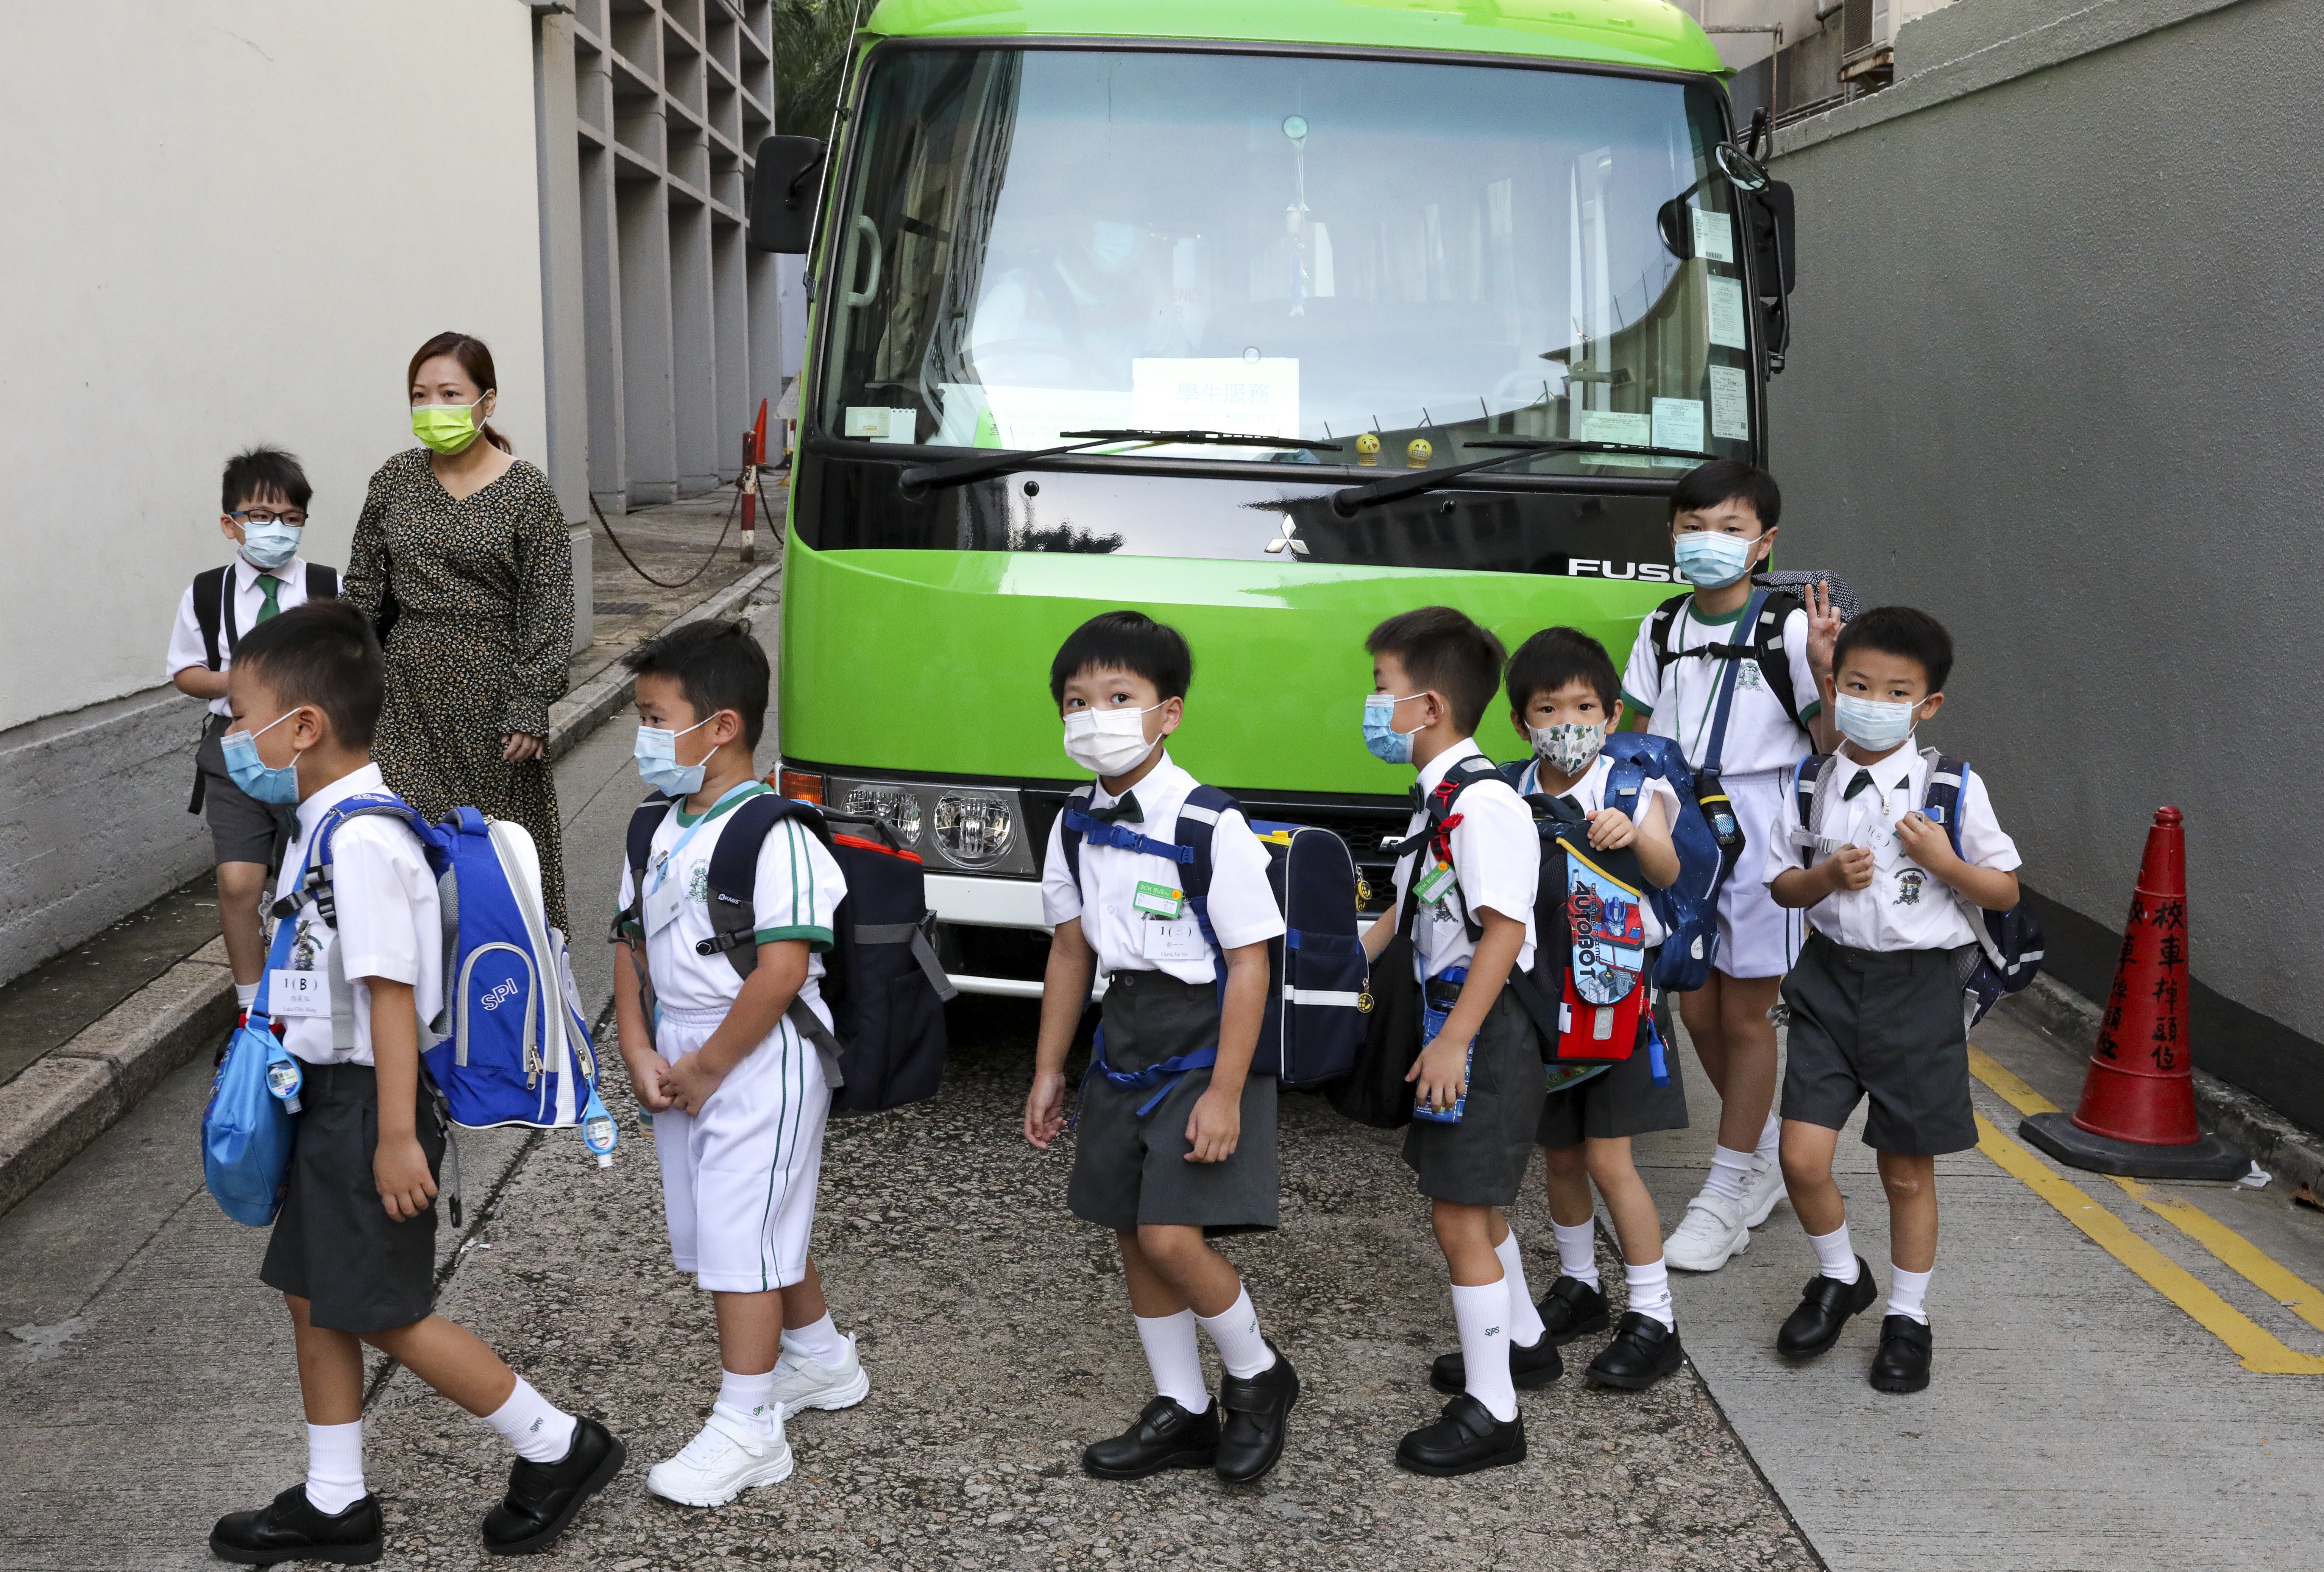 Students head to school in Wan Chai in September 2020. The government has announced that all schools will resume on a half-day basis later this month. Photo: SCMP/ Nora Tam